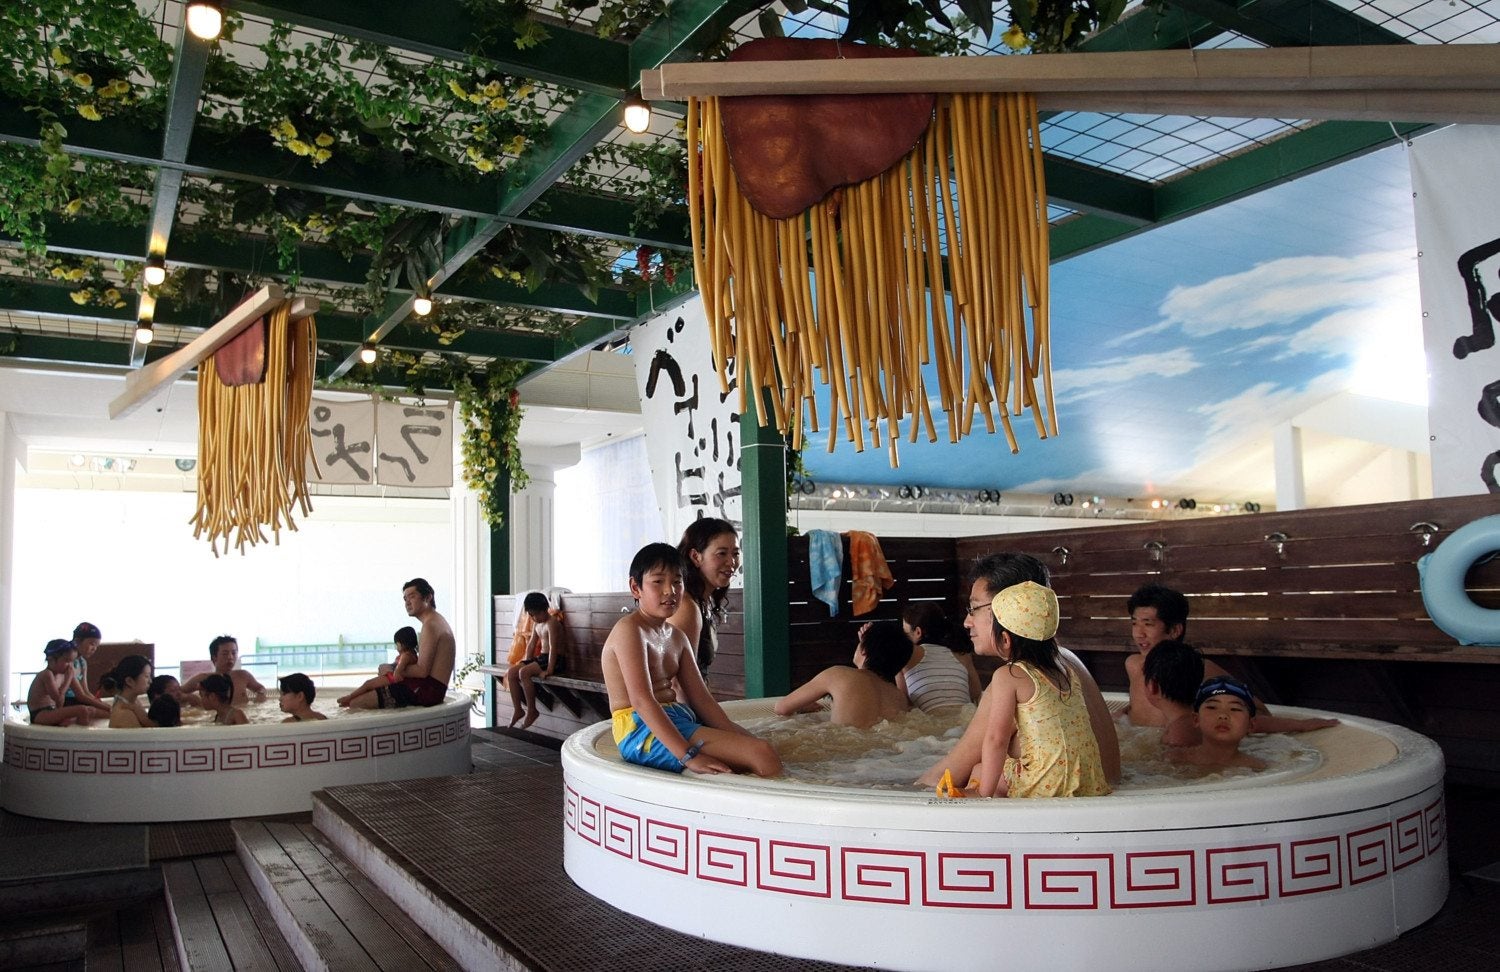 This Spa Has A Hot Spring Bath Filled with Melted Chocolate To Fulfil All Your Dreams - WORLD OF BUZZ 4